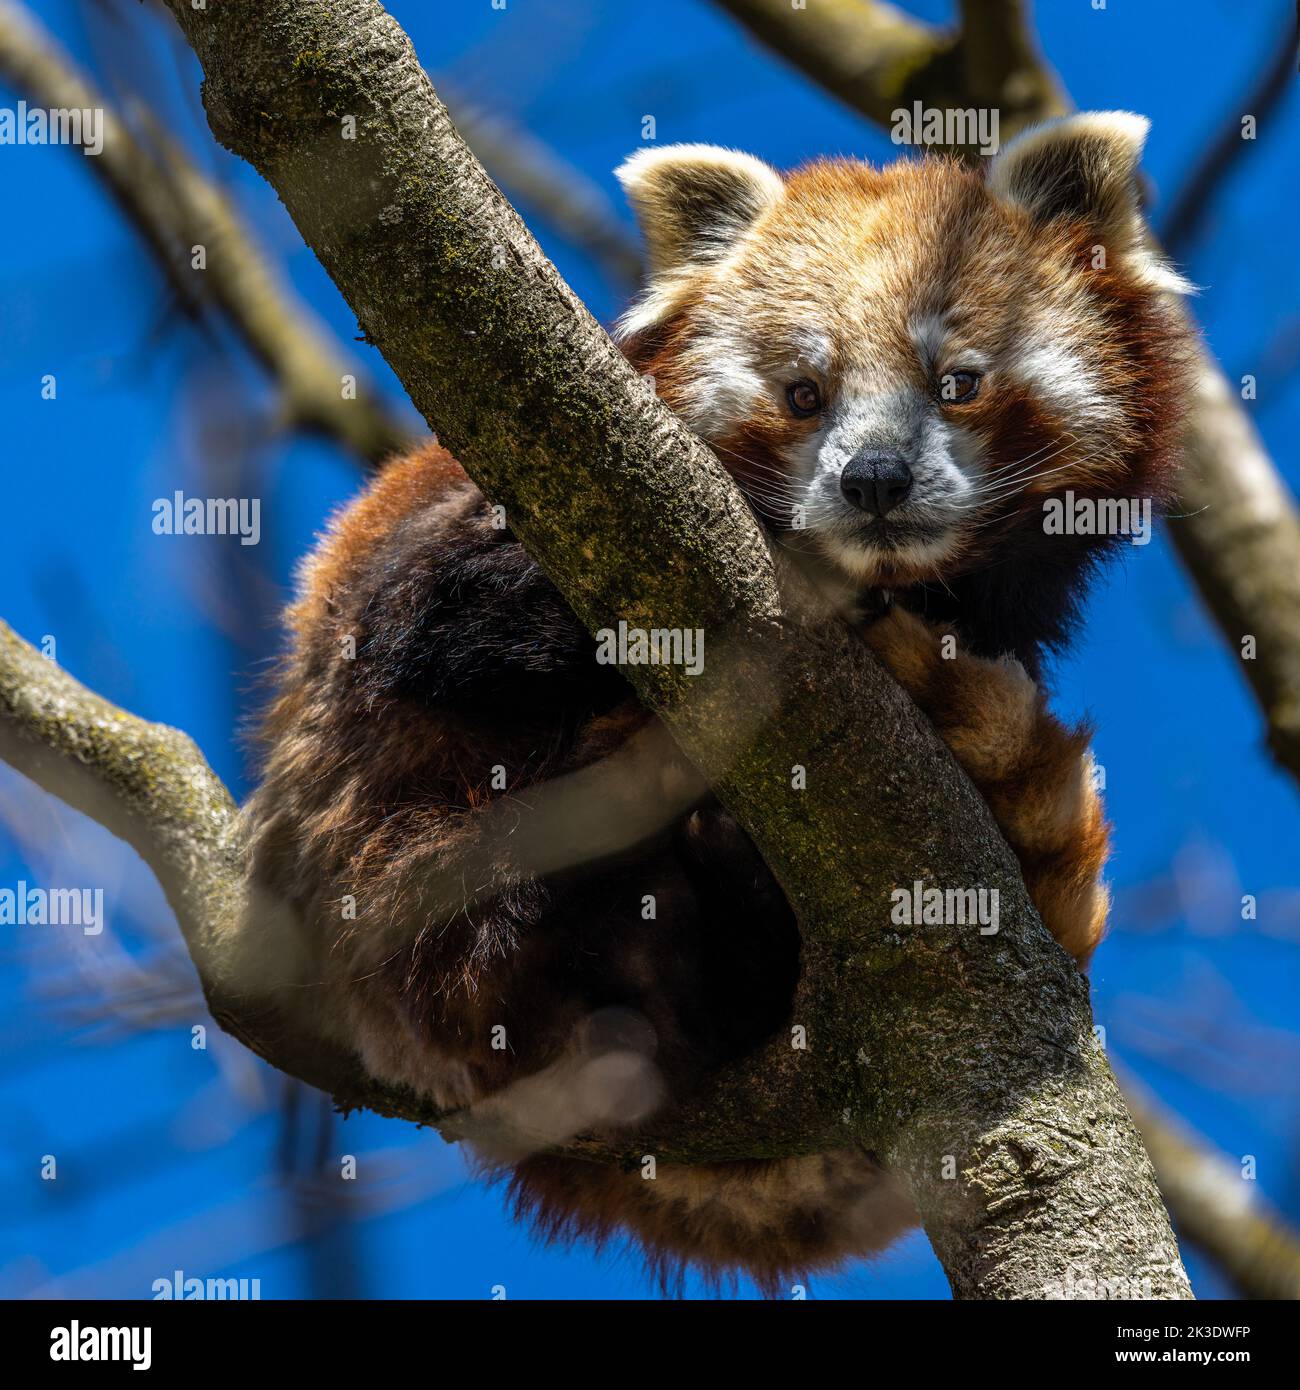 The red panda, Ailurus fulgens, also called the lesser panda and the red cat-bear. Stock Photo